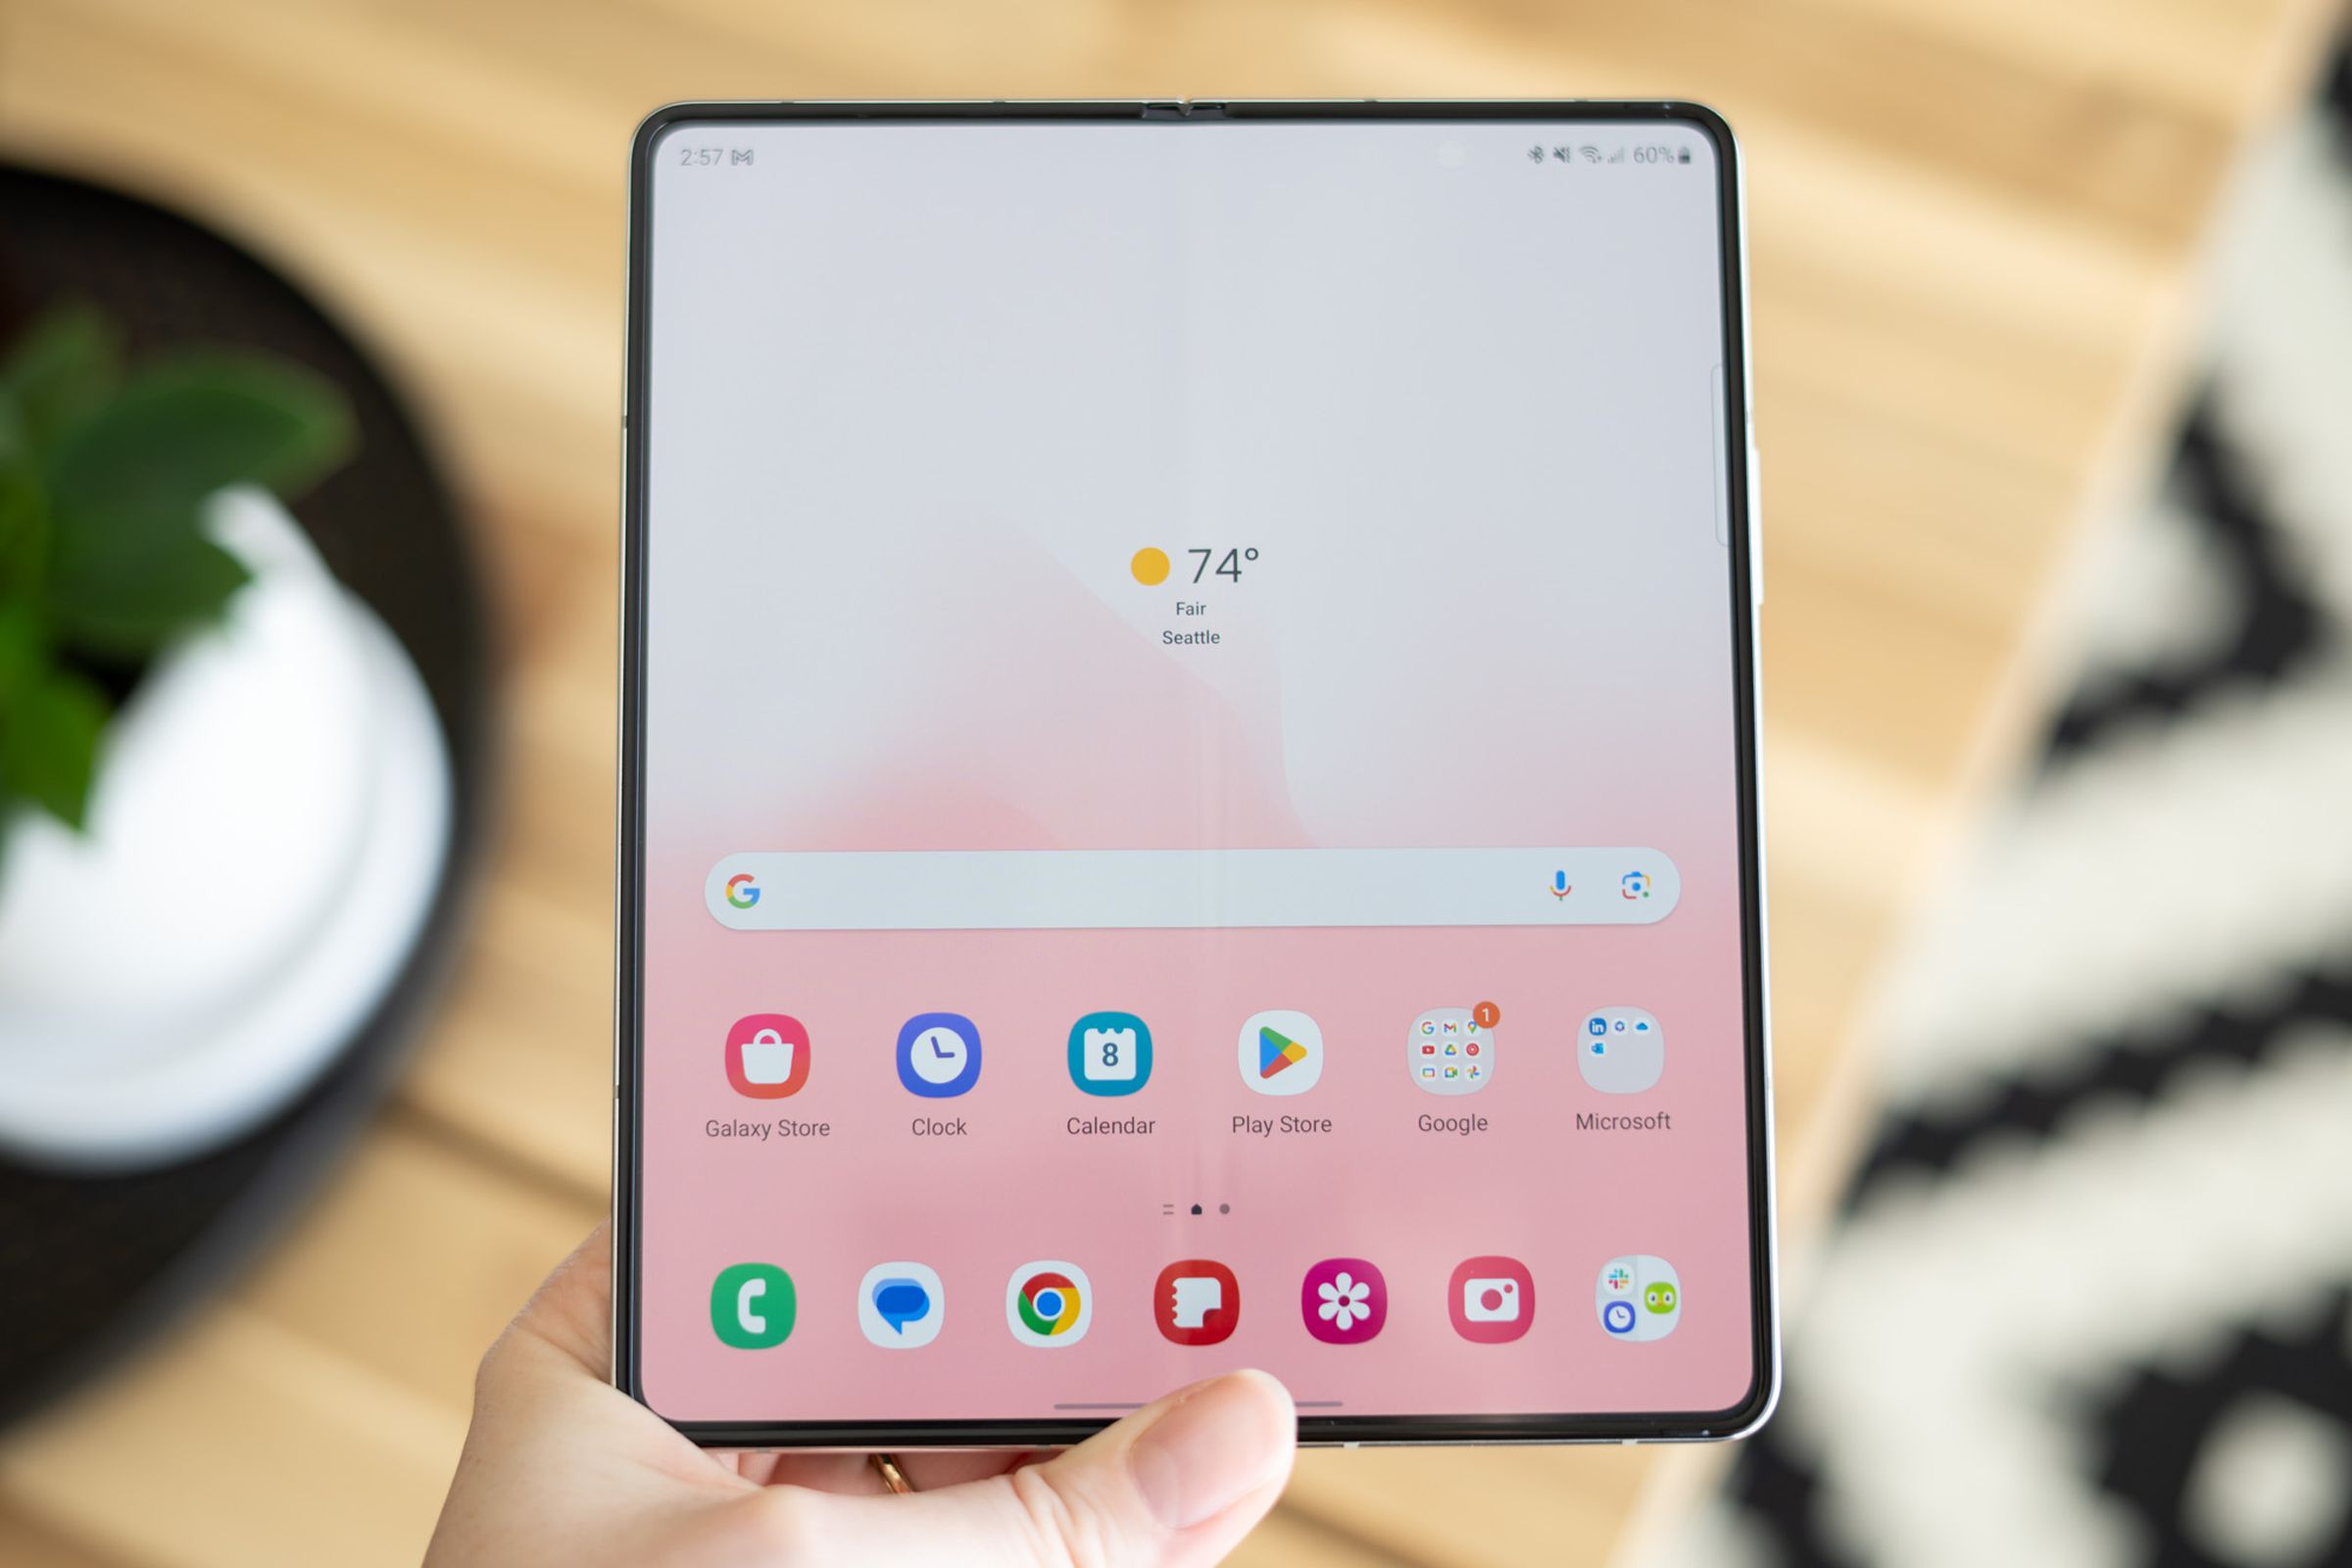 Samsung Galaxy Z Fold 5 unfolded in-hand showing home screen.